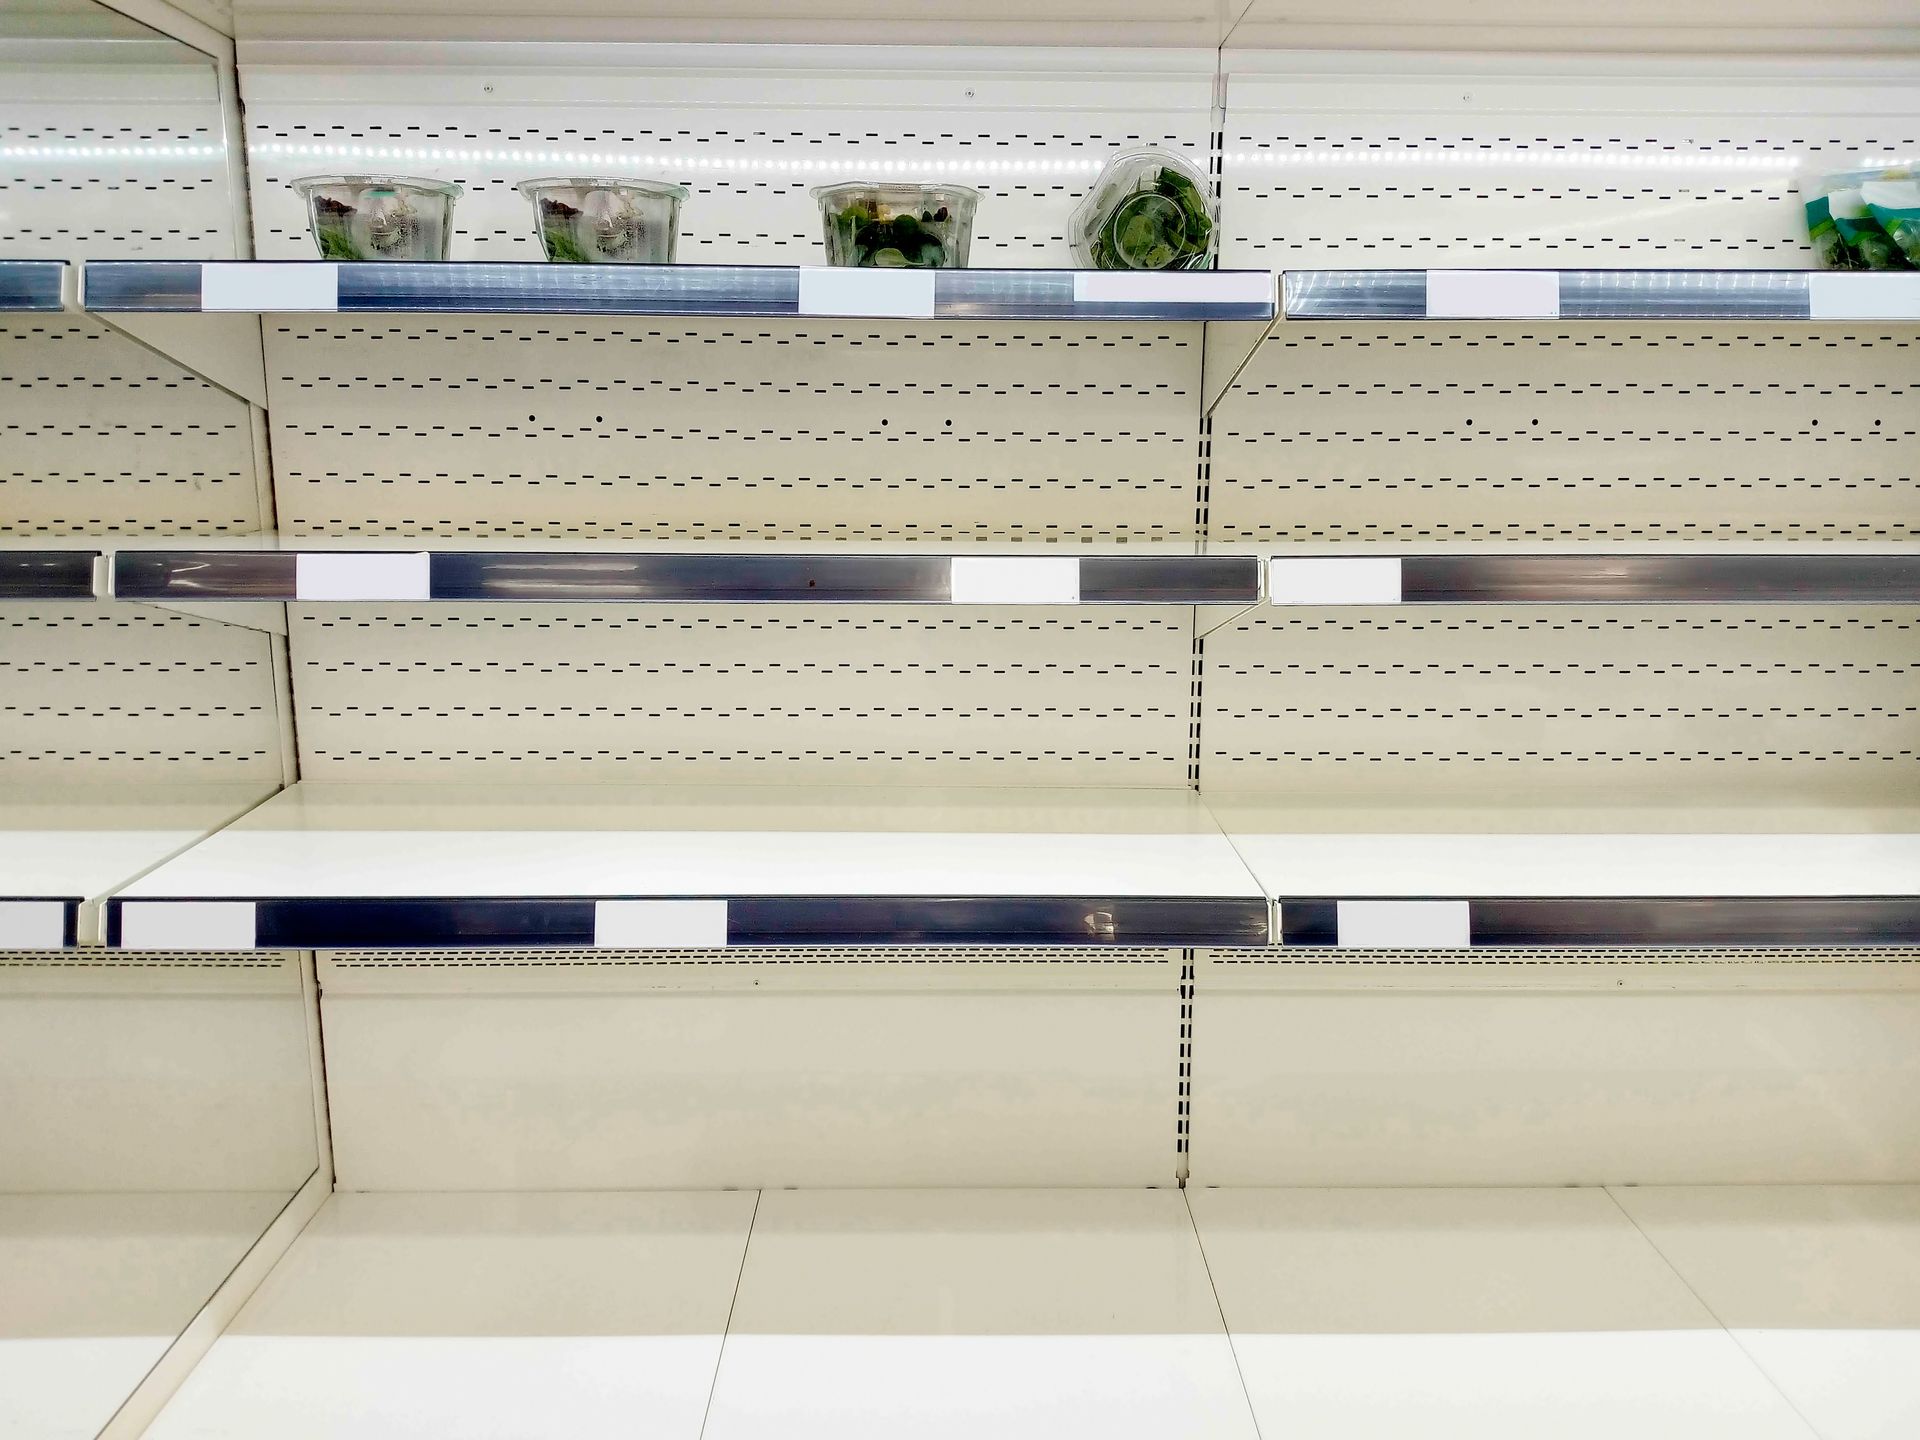 Empty supermarket shelves. The only remaining items are a few salads pushed to the back on the uttermost shelf.